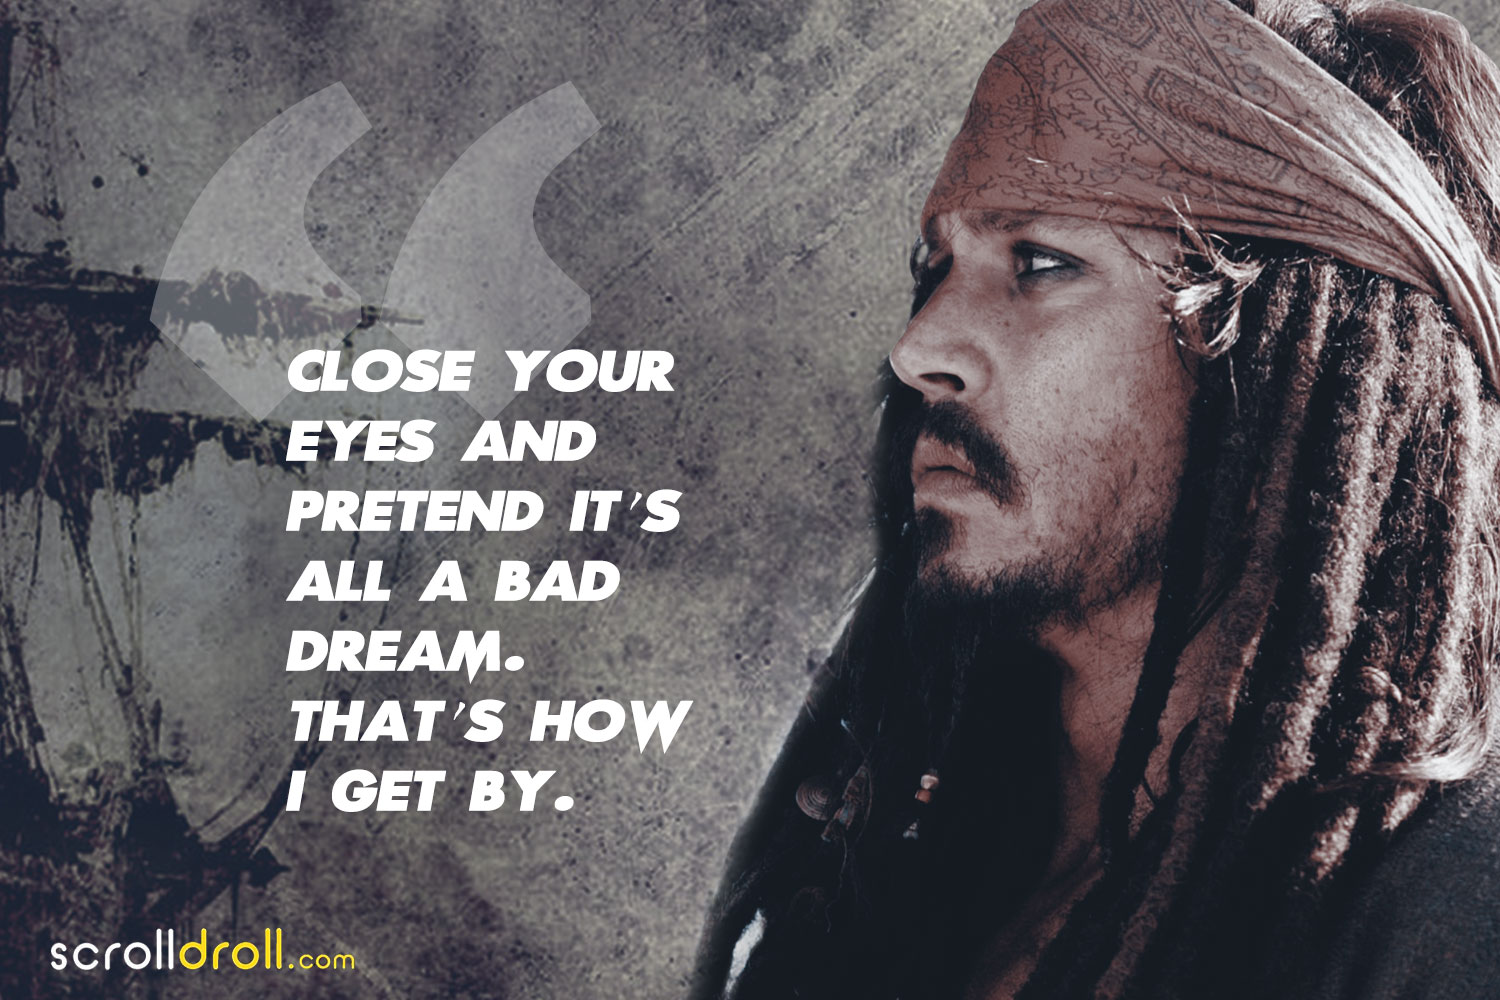 pirates of the caribbean 7 - Stories for the Youth!